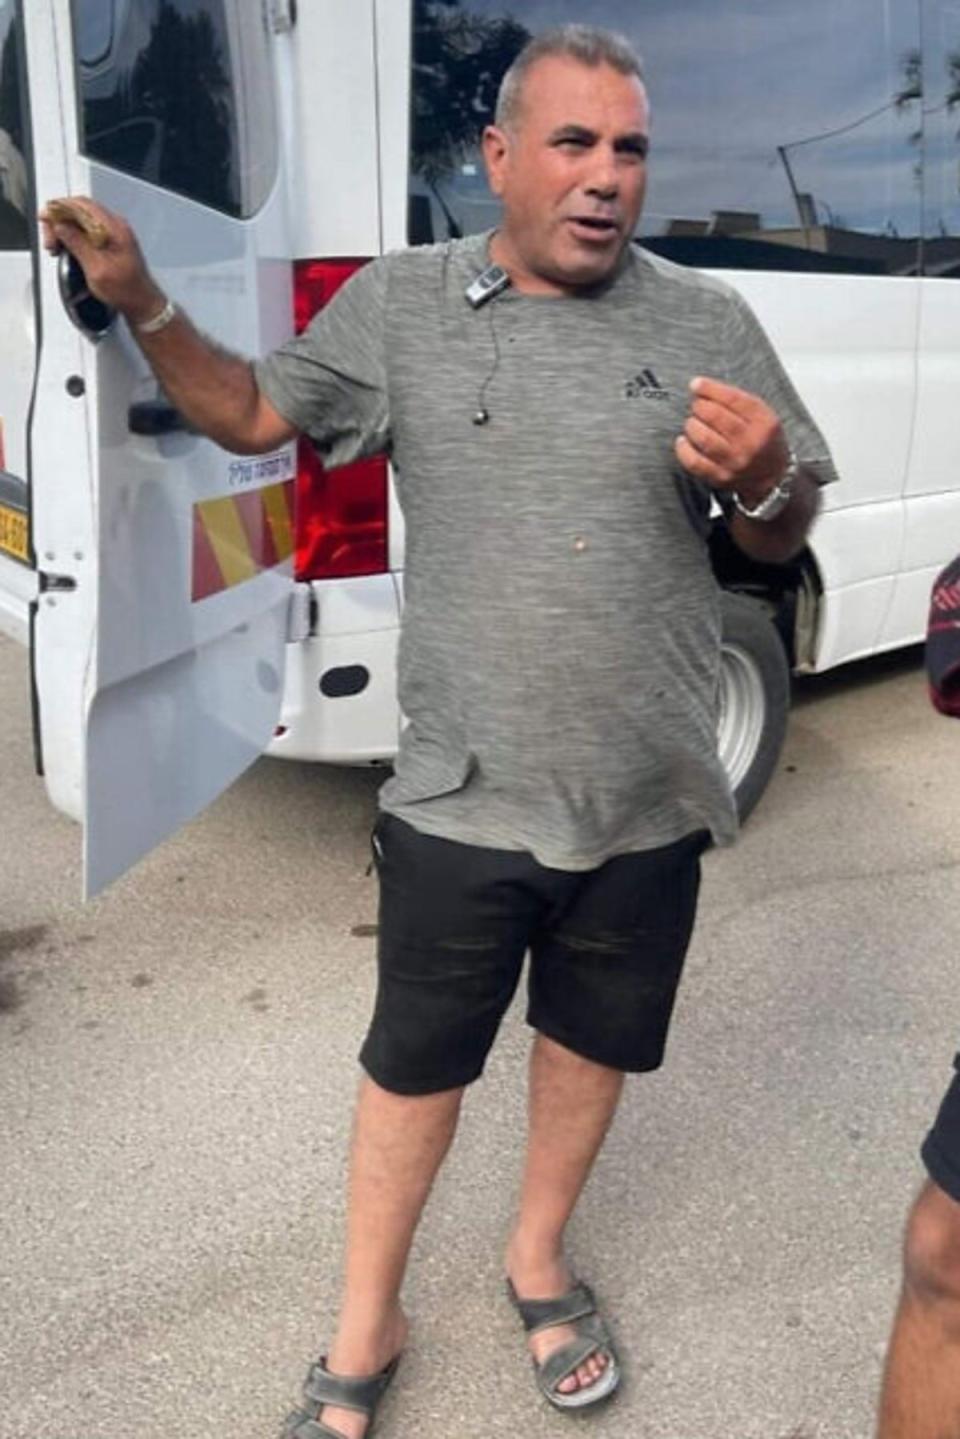 Yousef Ziadna, the Bedouin bus driver who rescued 30 people during the Hamas attack (Supplied)